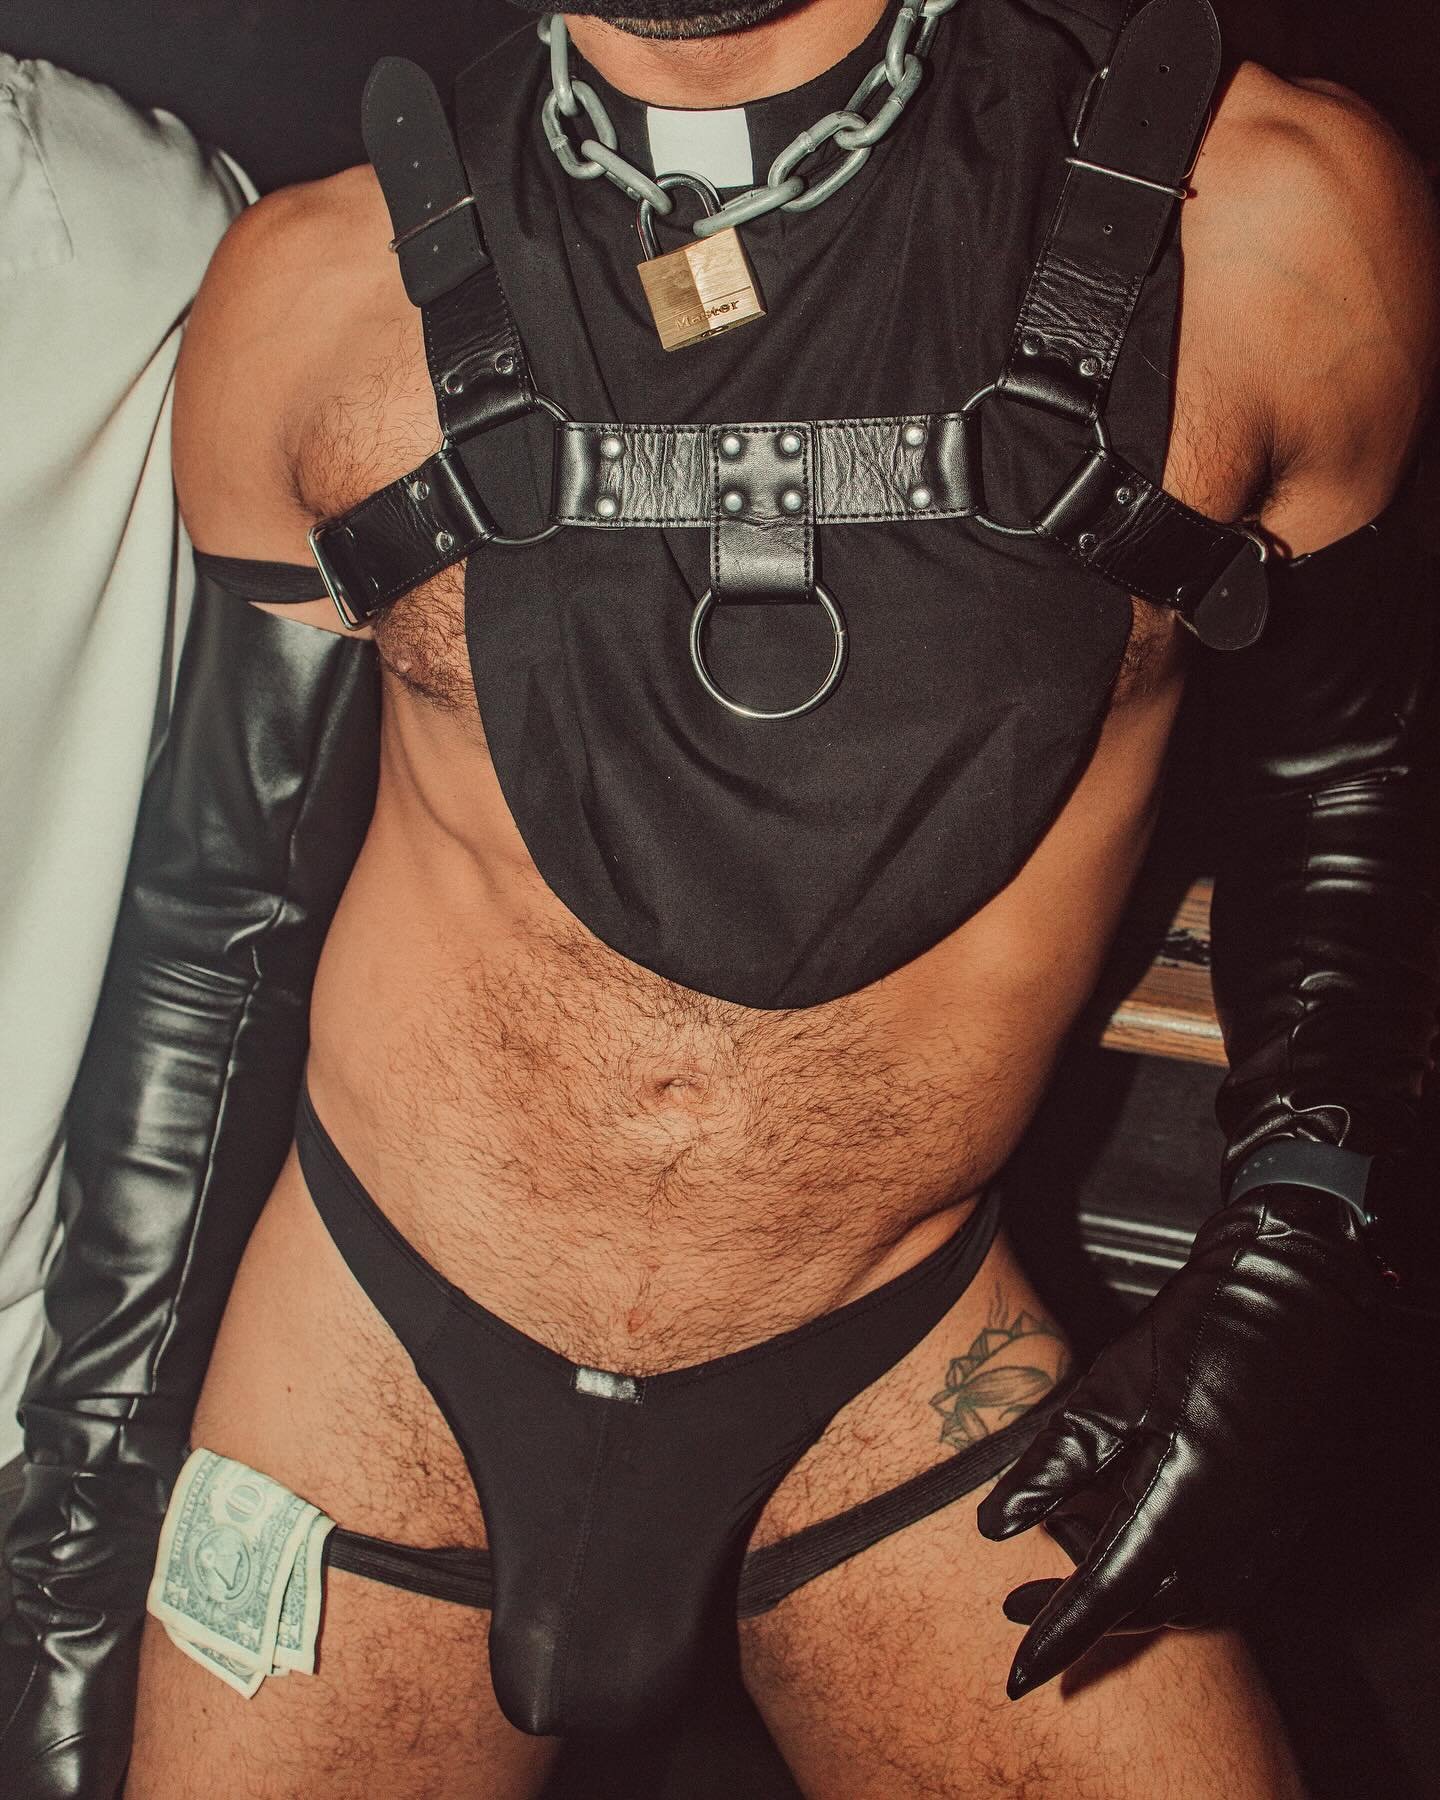 NSFW RESURRECTION EVENT PHOTOS ARE LIVE! LINK IN BIO
📸: @maximoxtravaganza 

https://www.nsfwny.com/photos/nsfw-ressurection-41224